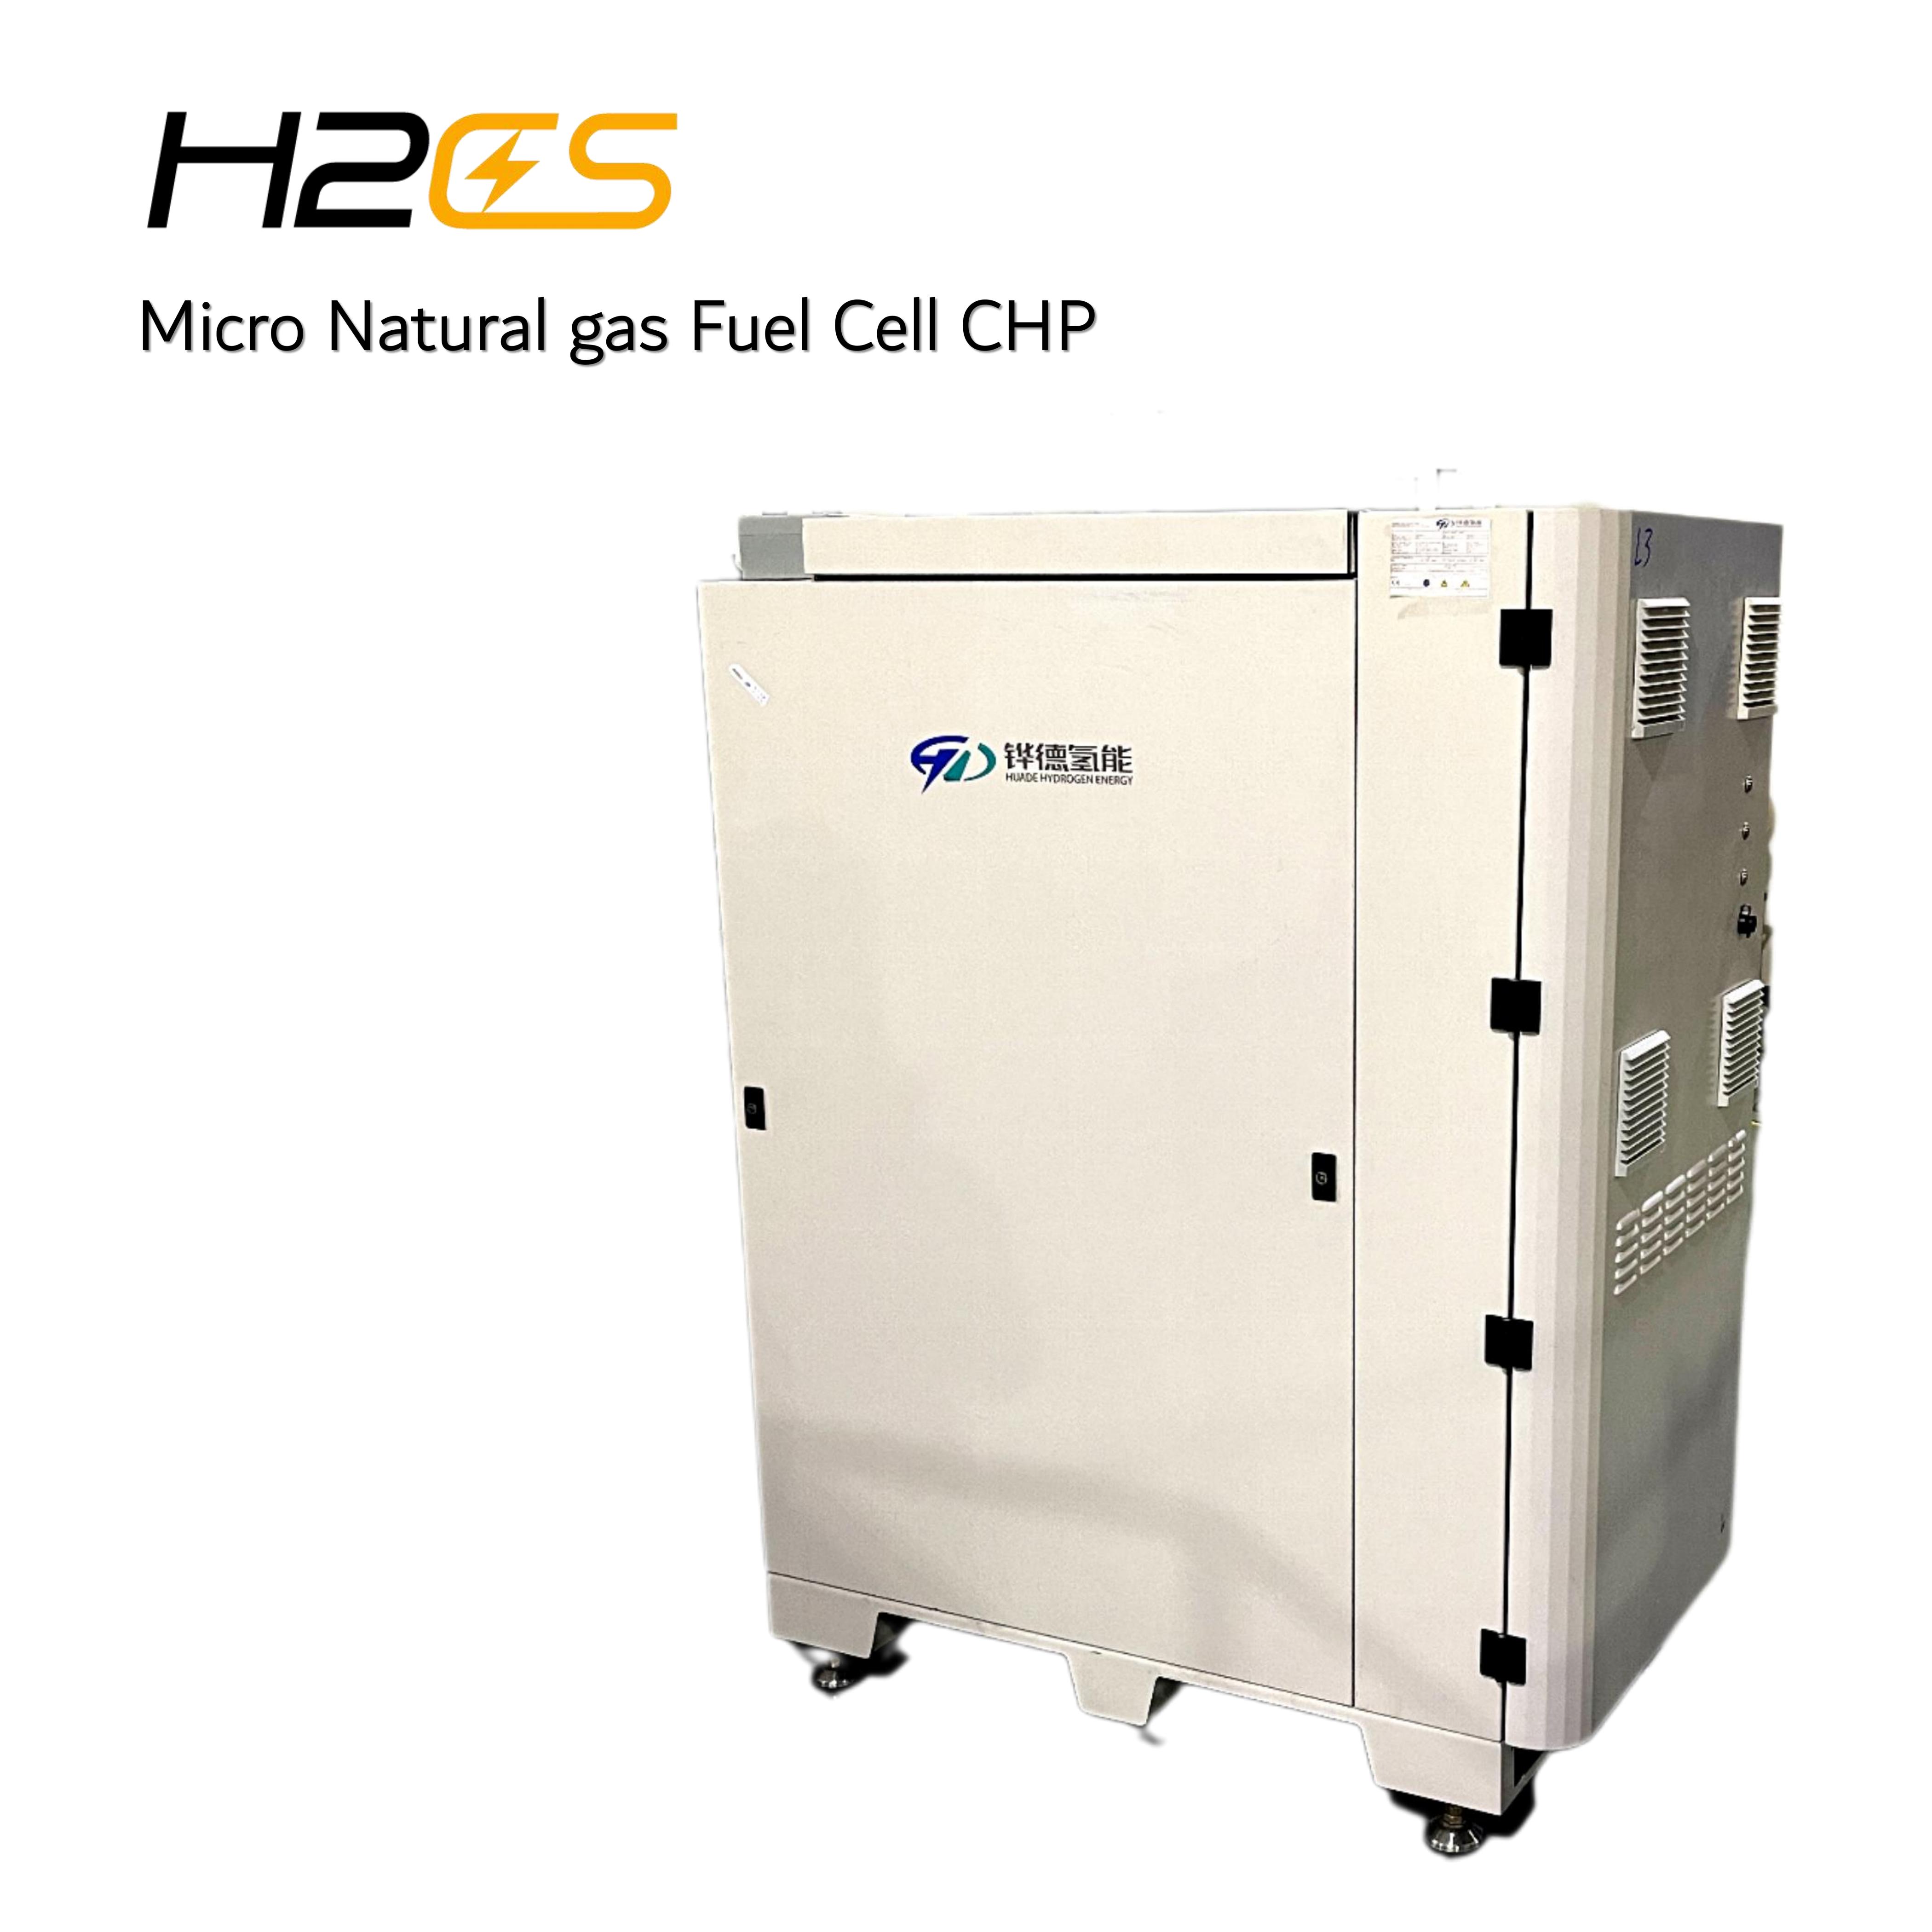 Microgrid Cooling CHP System Unit